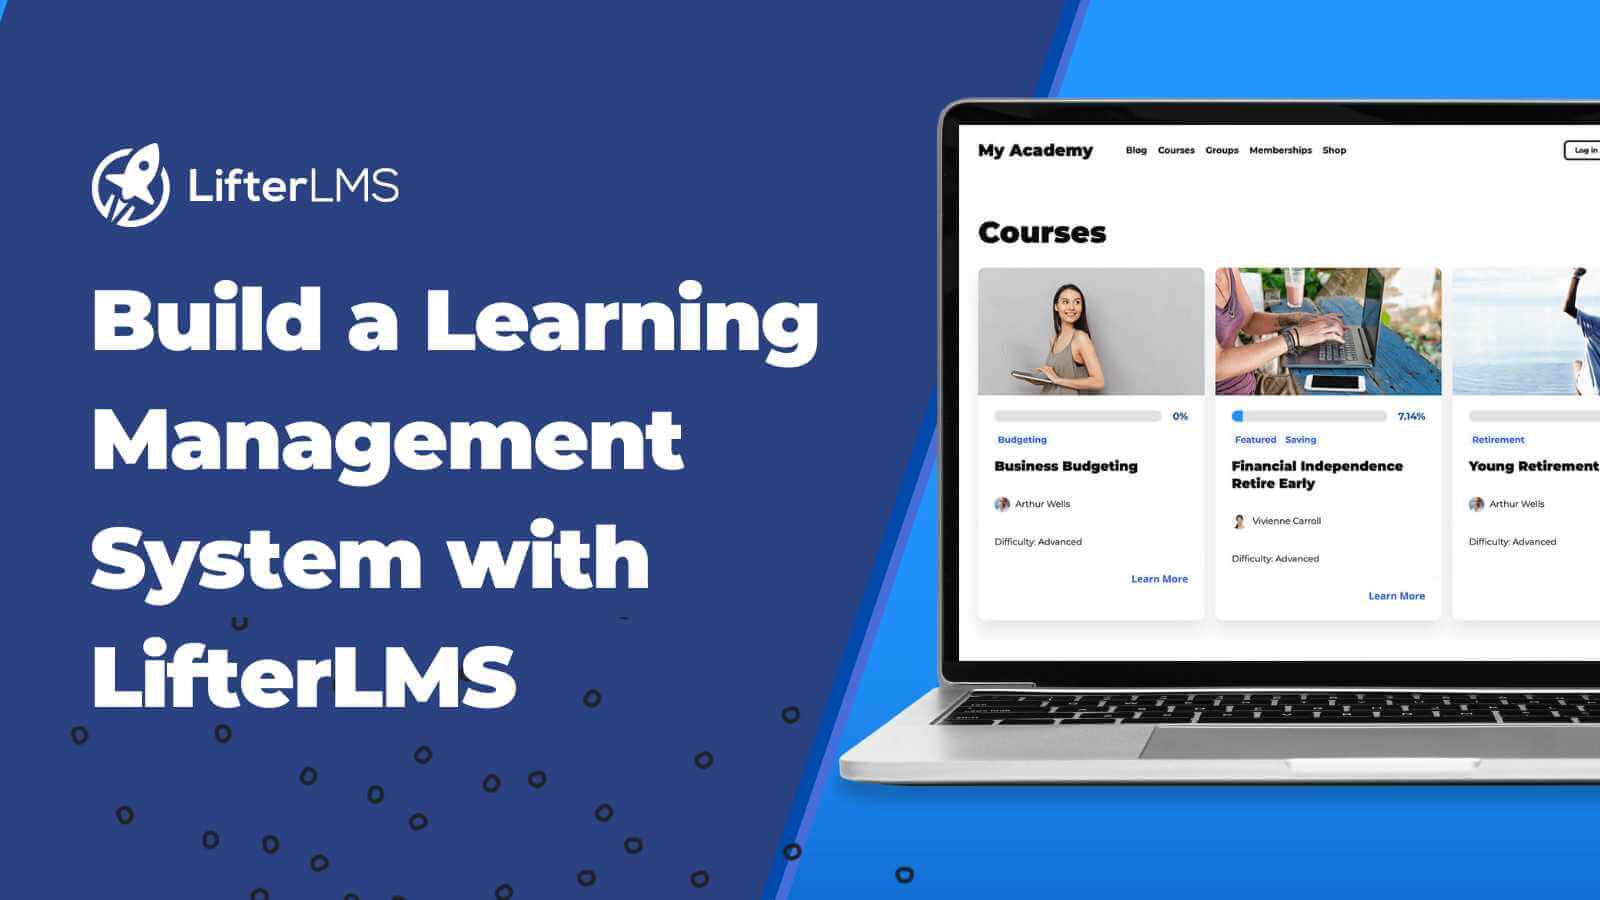 Build a Learning Management System with LifterLMS